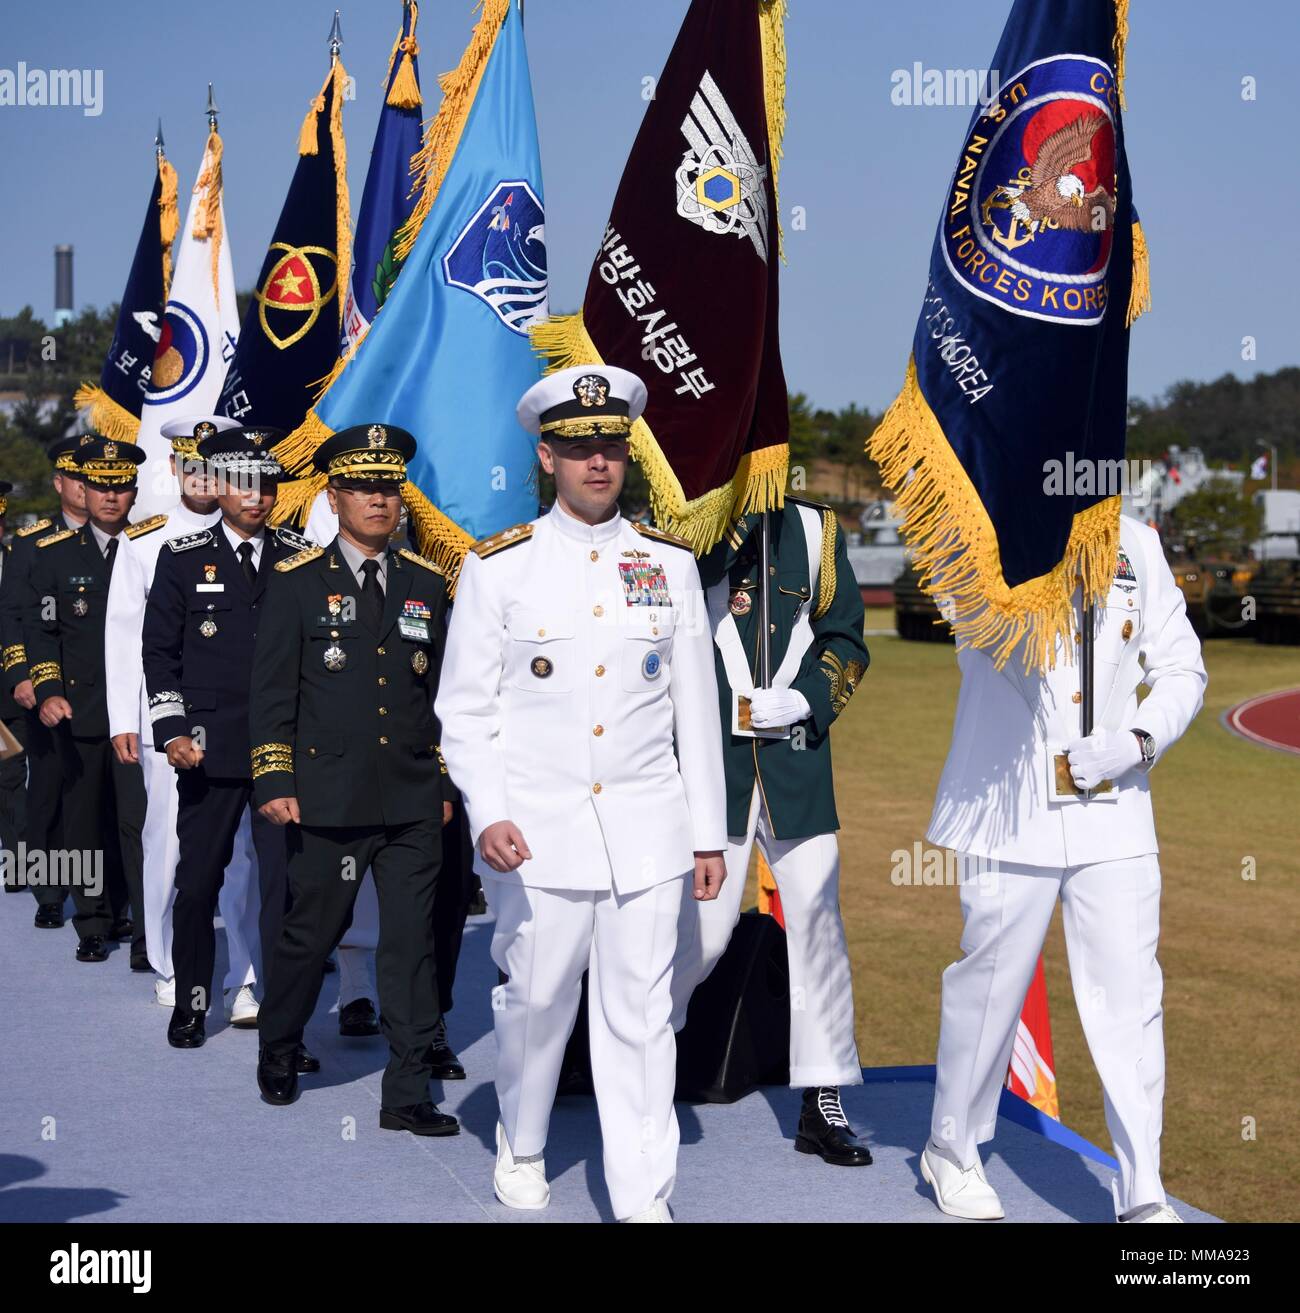 170928-N-TB148-105 PYEONGTAEK, Republic of Korea (Sept. 28, 2017) Rear Adm. Brad Cooper, commander, Naval Forces Korea (CNFK), marches to the award stage during the 69th annual Republic of Korea (ROK) Armed Forces Day Ceremony. Armed Forces Day comemmorates the service of men and women in the ROK armed forces, the day that South Korea broke through the 38th parallel during the Korean War in 1950. Cooper is also presented the Presidential Unit Citation by ROK President Moon, Jae-in, this is the first time a U.S. Navy command is presented this award since the end of the Korean War.  (U.S. Navy p Stock Photo